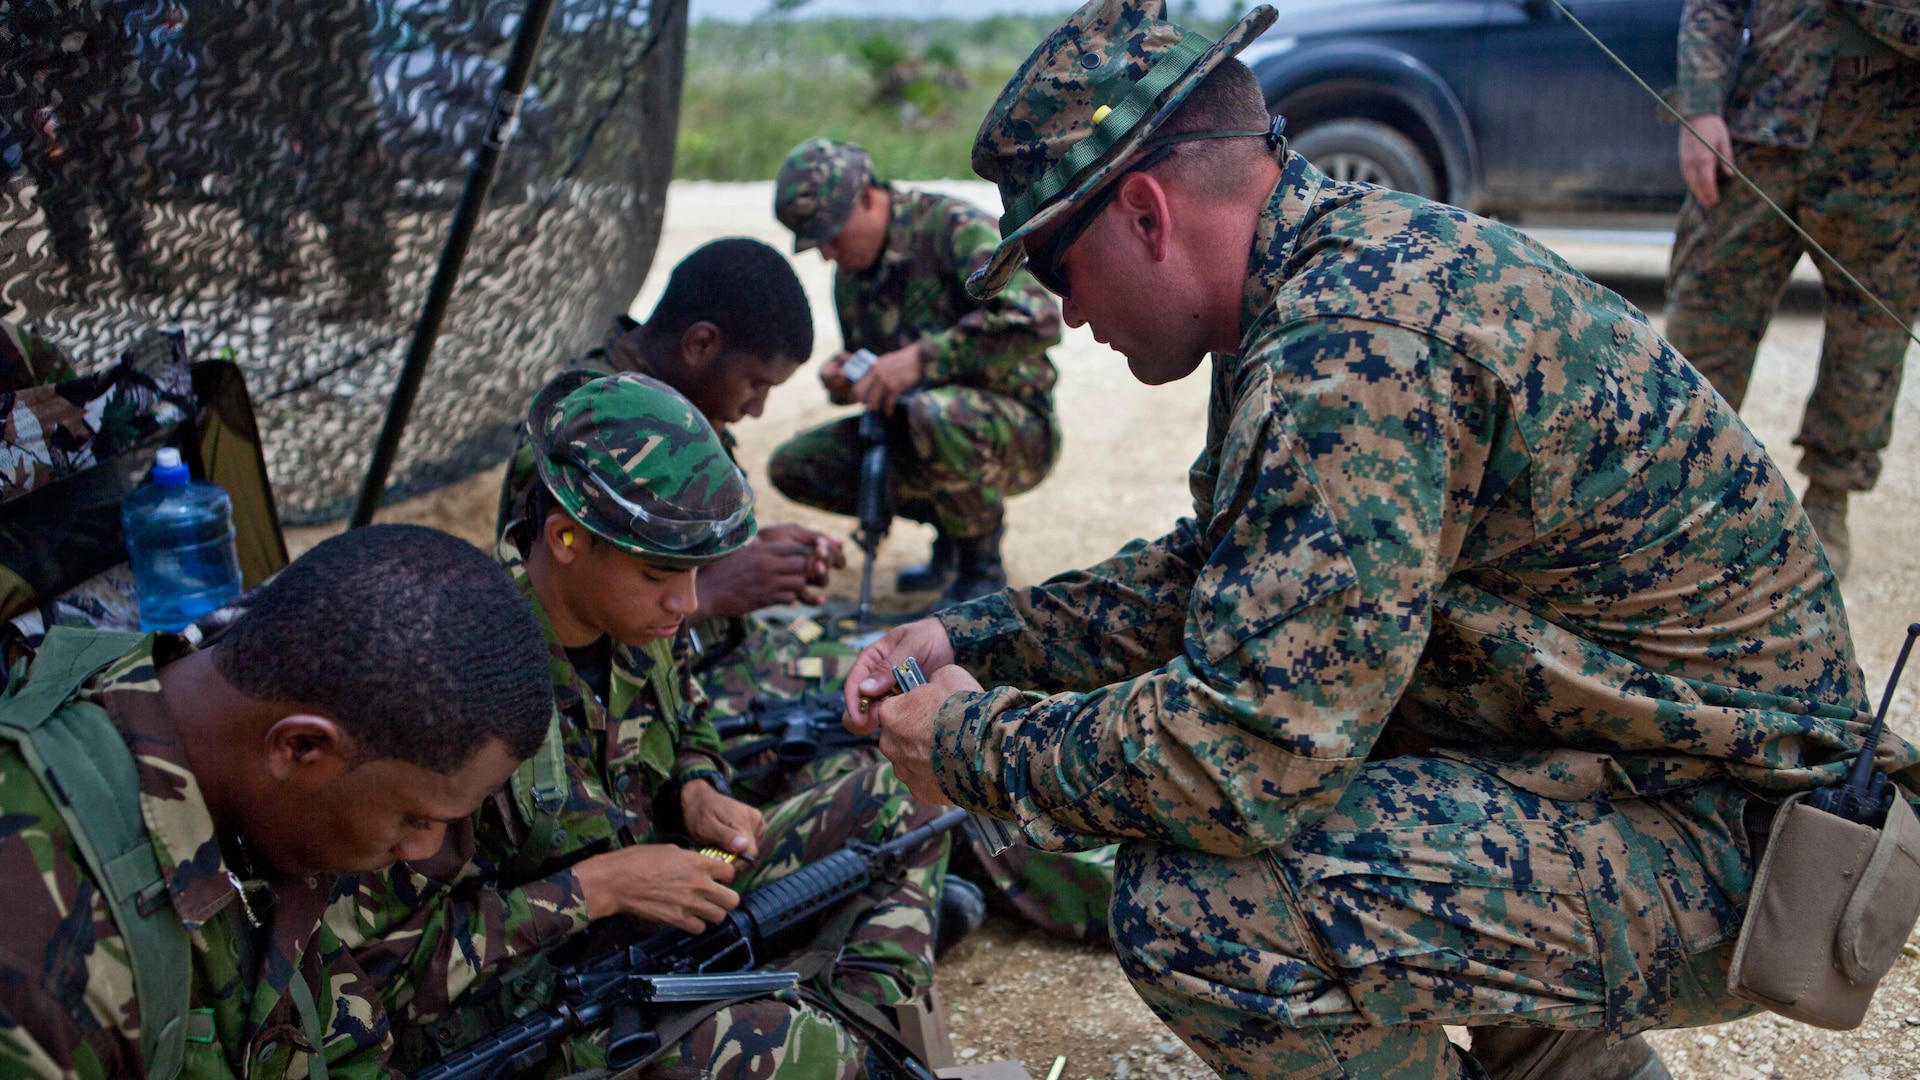 U.S. Marine Sgt. Dustin J. Houghton, an infantry trainer with the Belize Detachment, Ground Combat Element, Special Purpose Marine Air-Ground Task Force - Southern Command, shows service members with the Belize Defence Force how to load their ammunition into magazines as part of basic combat marksmanship training near Ladyville, Belize, July 20, 2017. The training was part of basic infantry skills course taught by the detachment to members of the BDF. The Marines and sailors of SPMAGTF-SC are deployed to Central America for the next six months to conduct security cooperation training and engineering projects with their counterparts in Honduras, Guatemala, Belize and El Salvador.